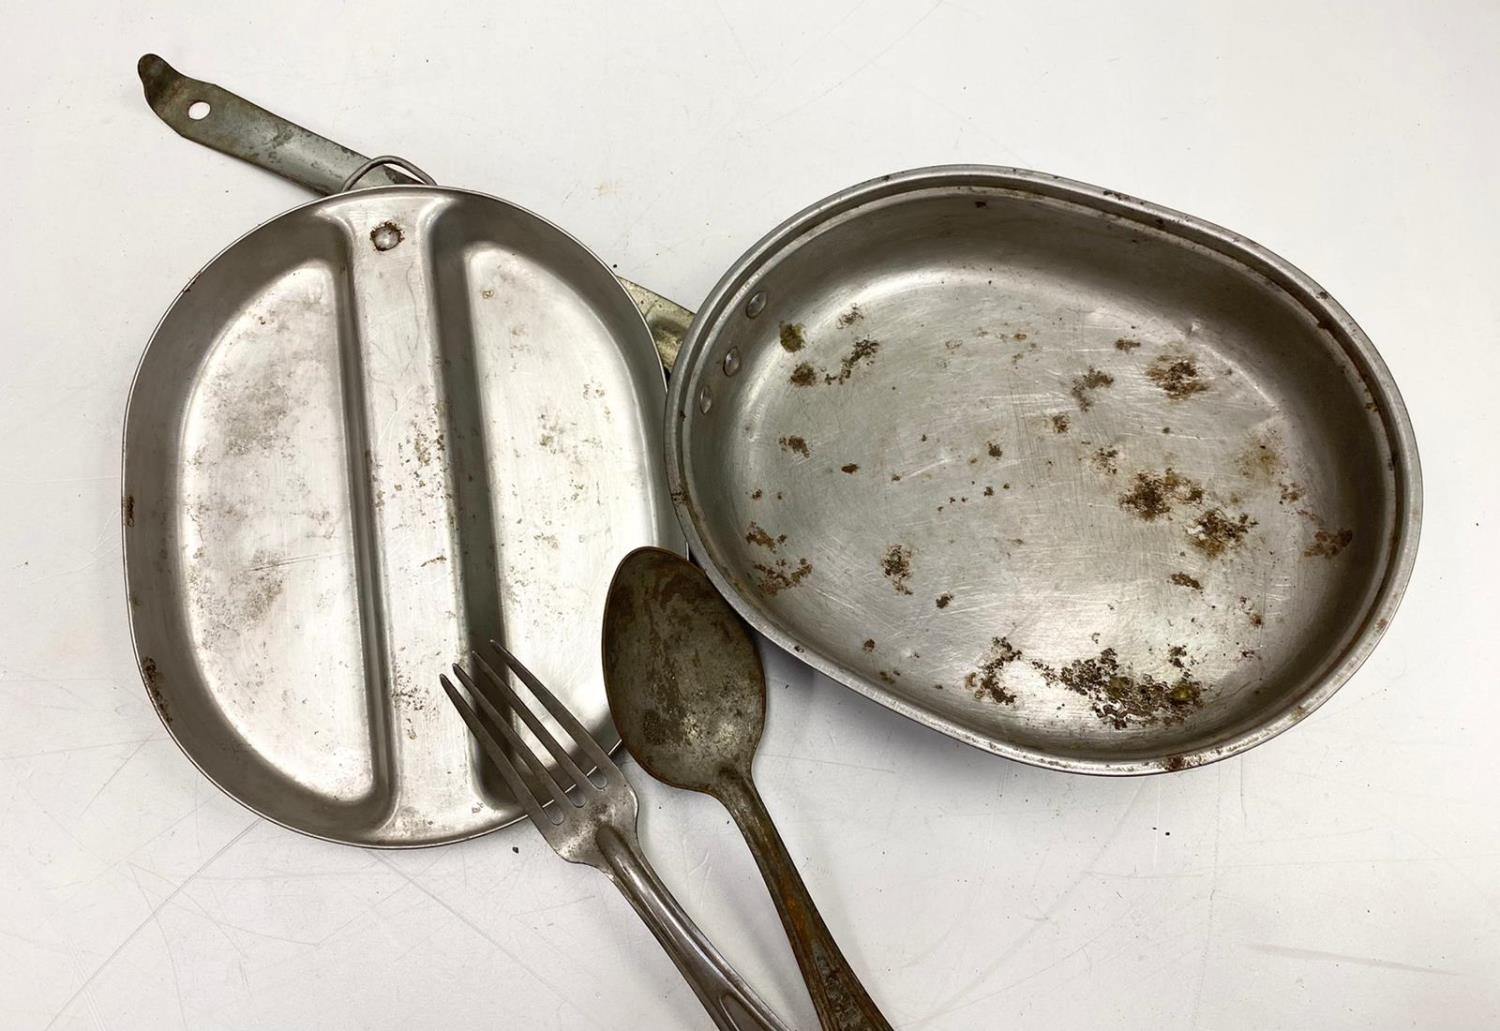 Vietnam Flea Market Find: US Mess Tin Dated 1951 with a fork and spoon.